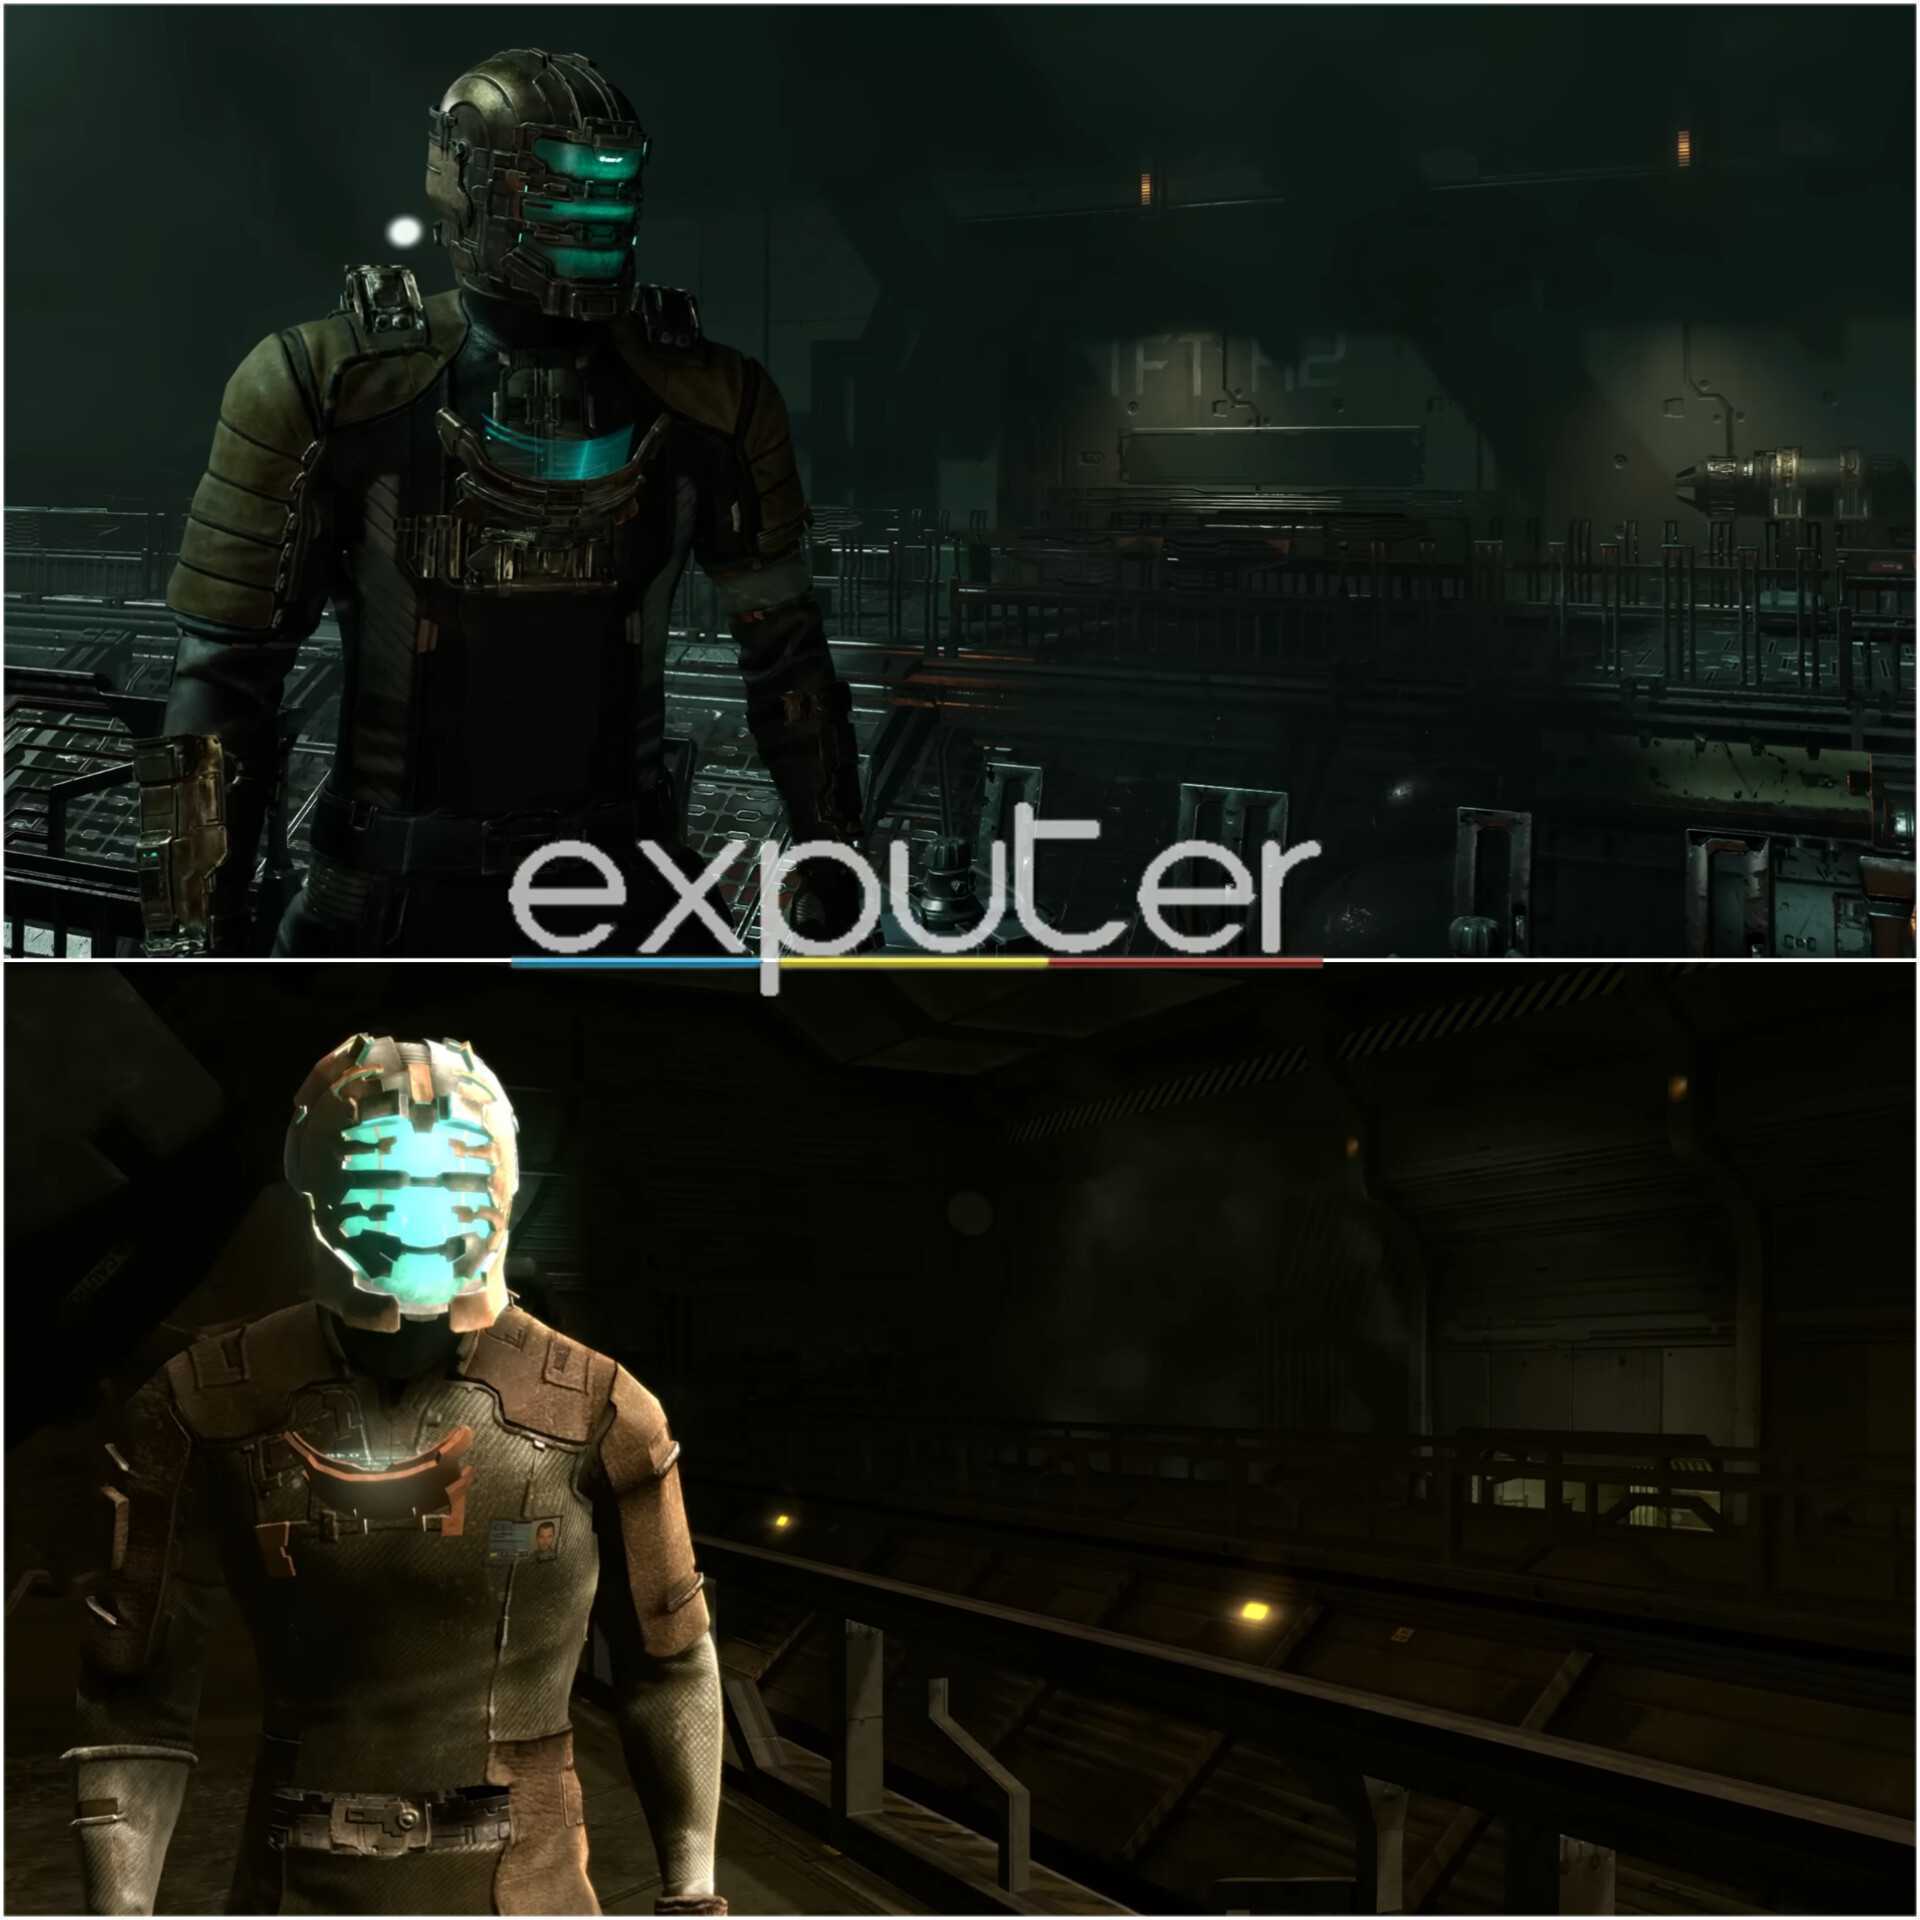 dead space remake graphics